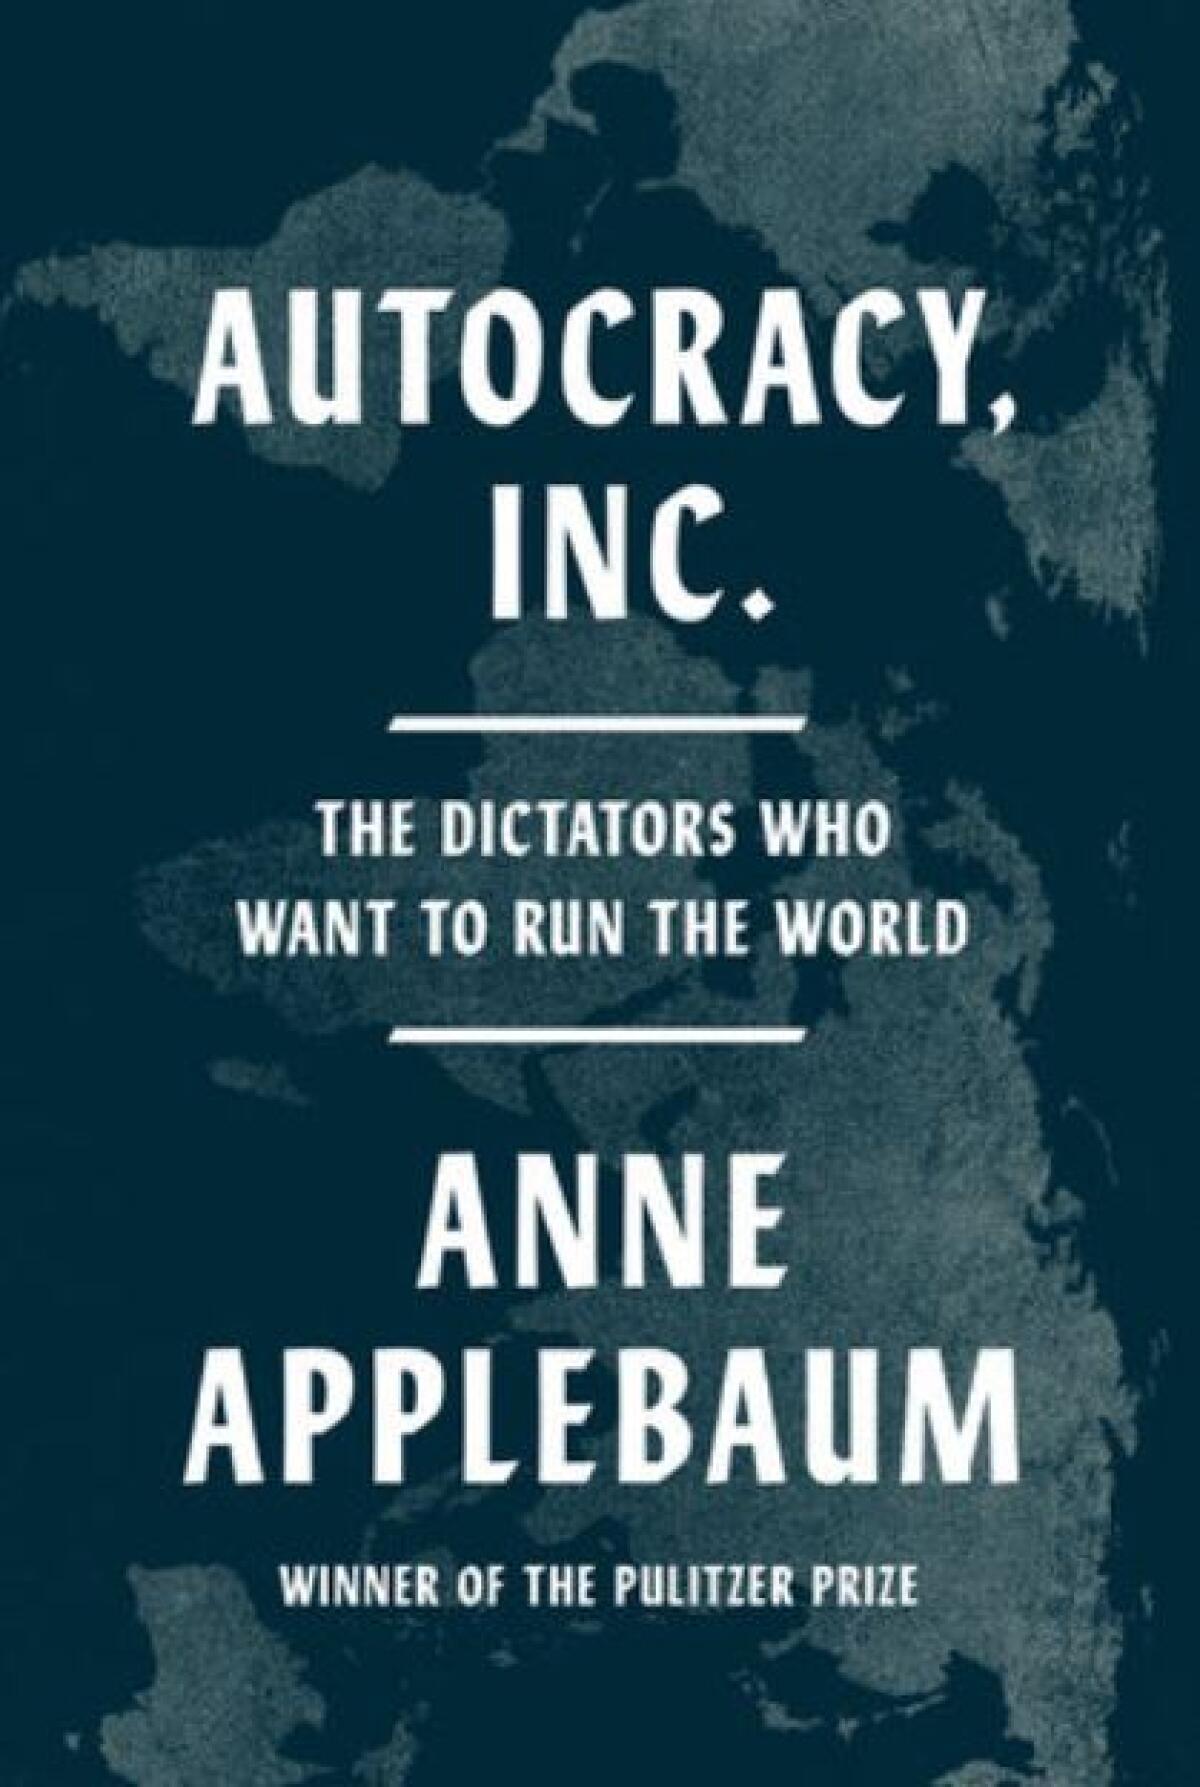 Cover of "Autocracy, Inc."